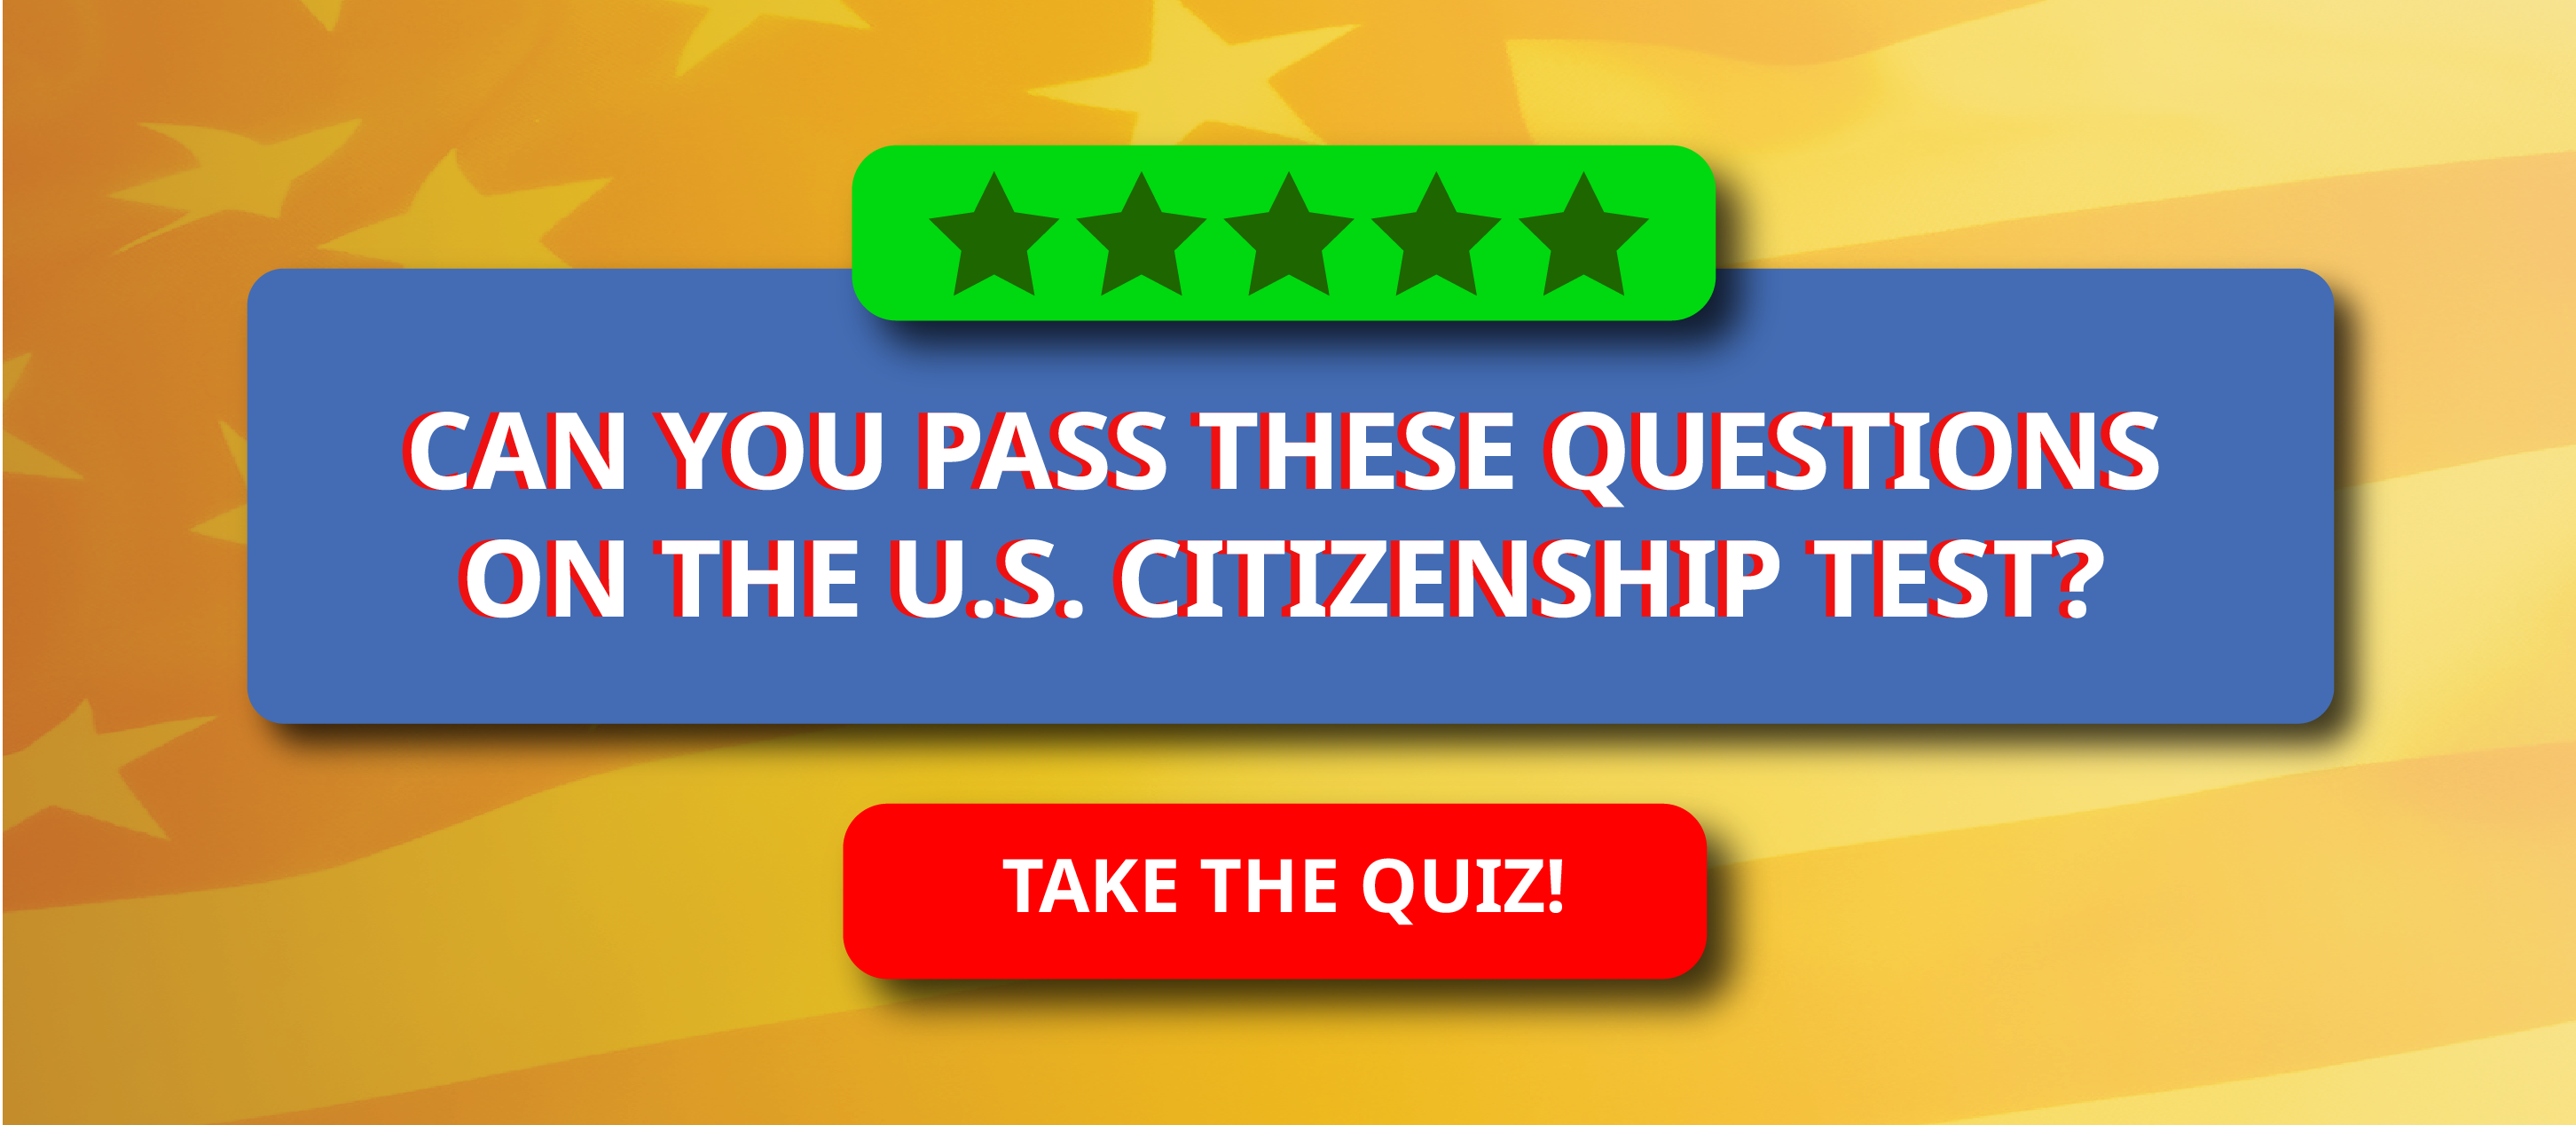 Golden background with faint American flag. Green rectangle at top with 5 dark green stars. Blue rectangle with white text reads "Can you pass these questions on the U.S. Citizenship Test?" Red rectangle at bottom with white text reads "Take the quiz!"